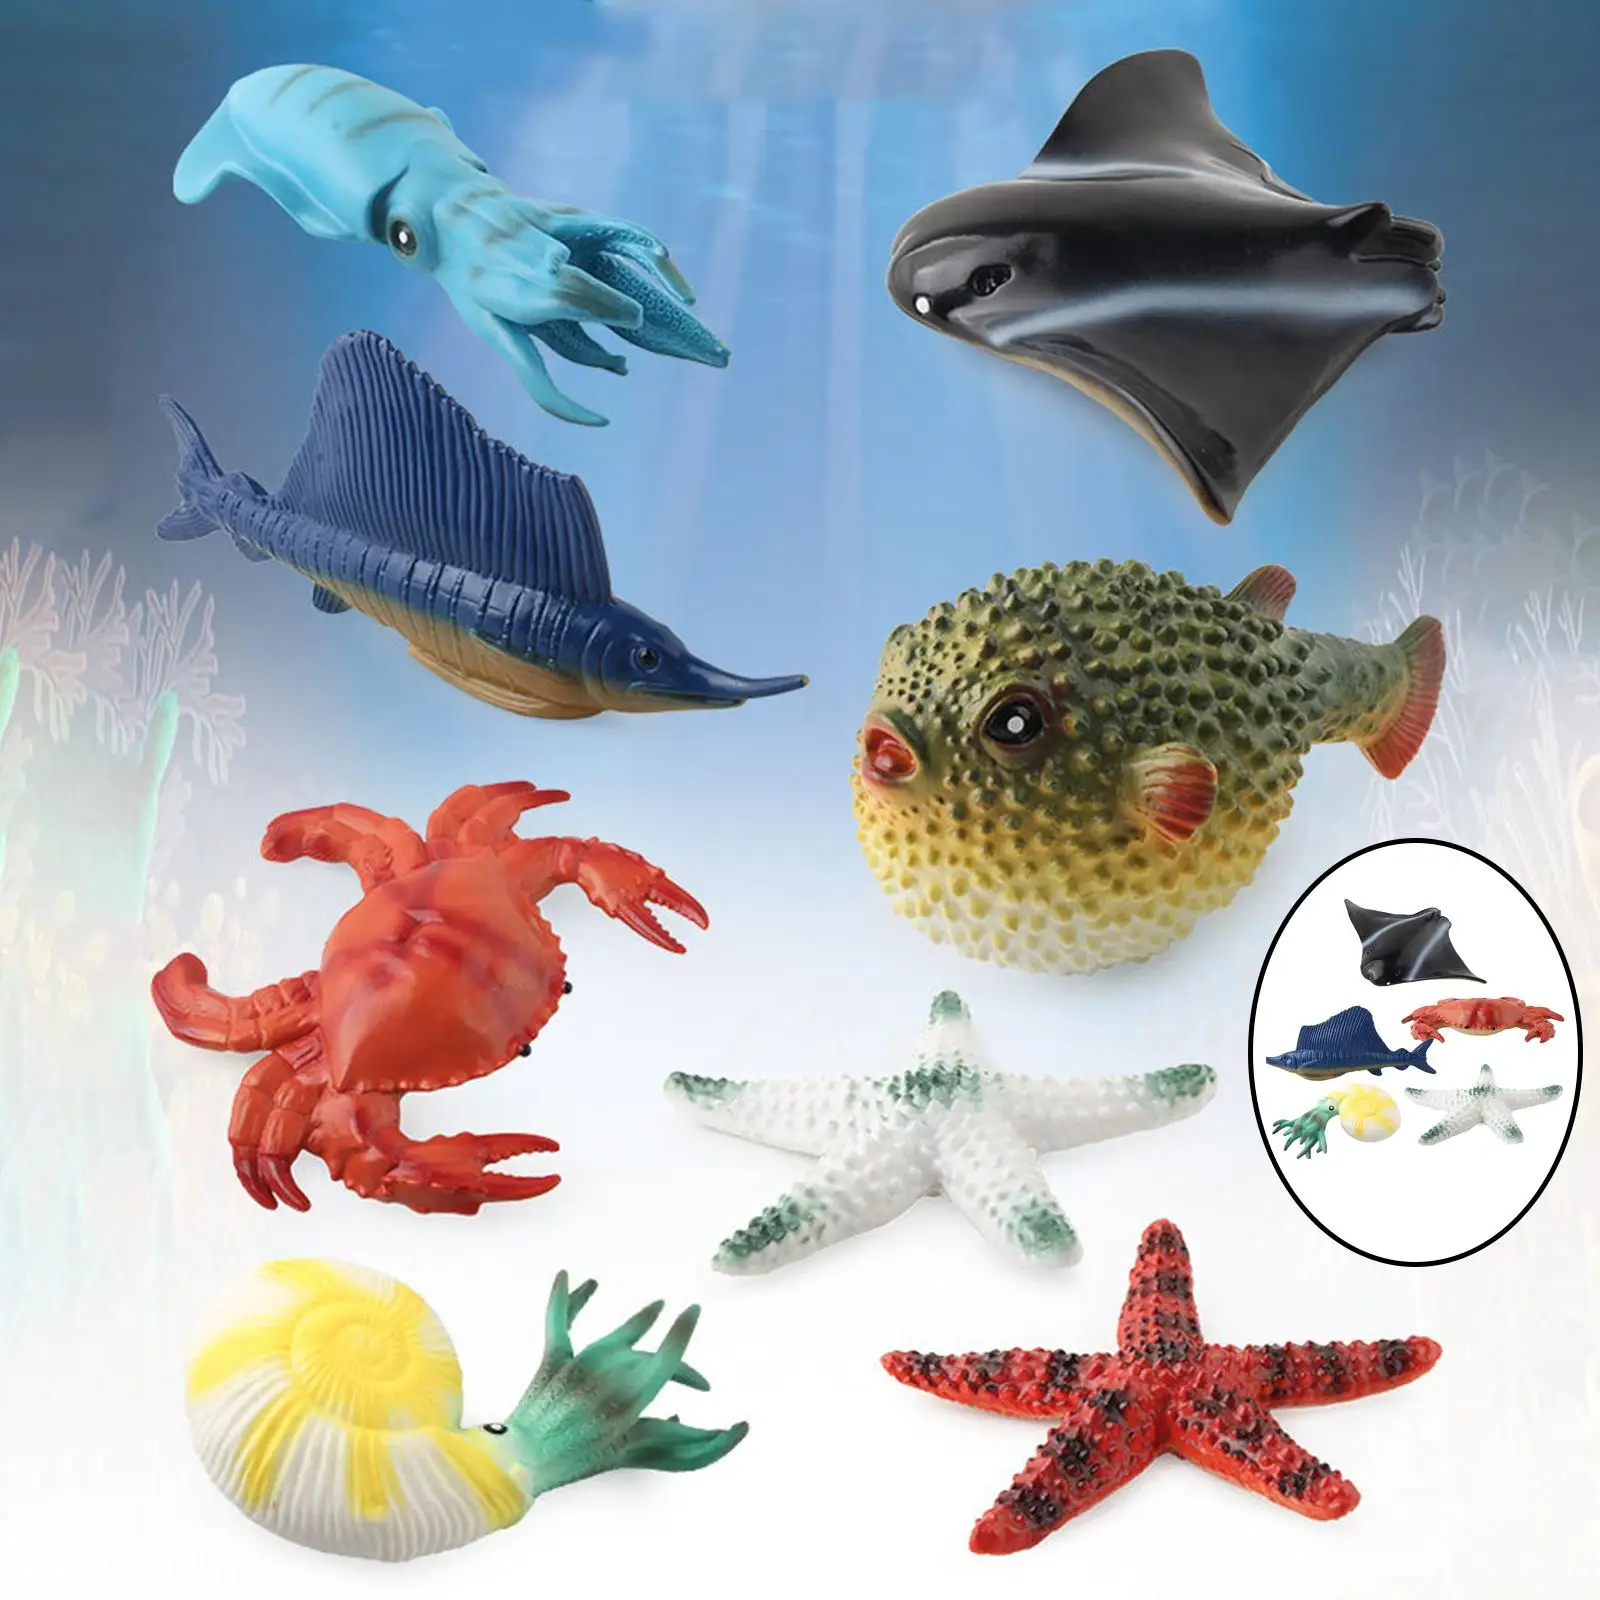 5 Pieces Marine Animal Model Manta Ray Squid Educational Toys Tools for Kids